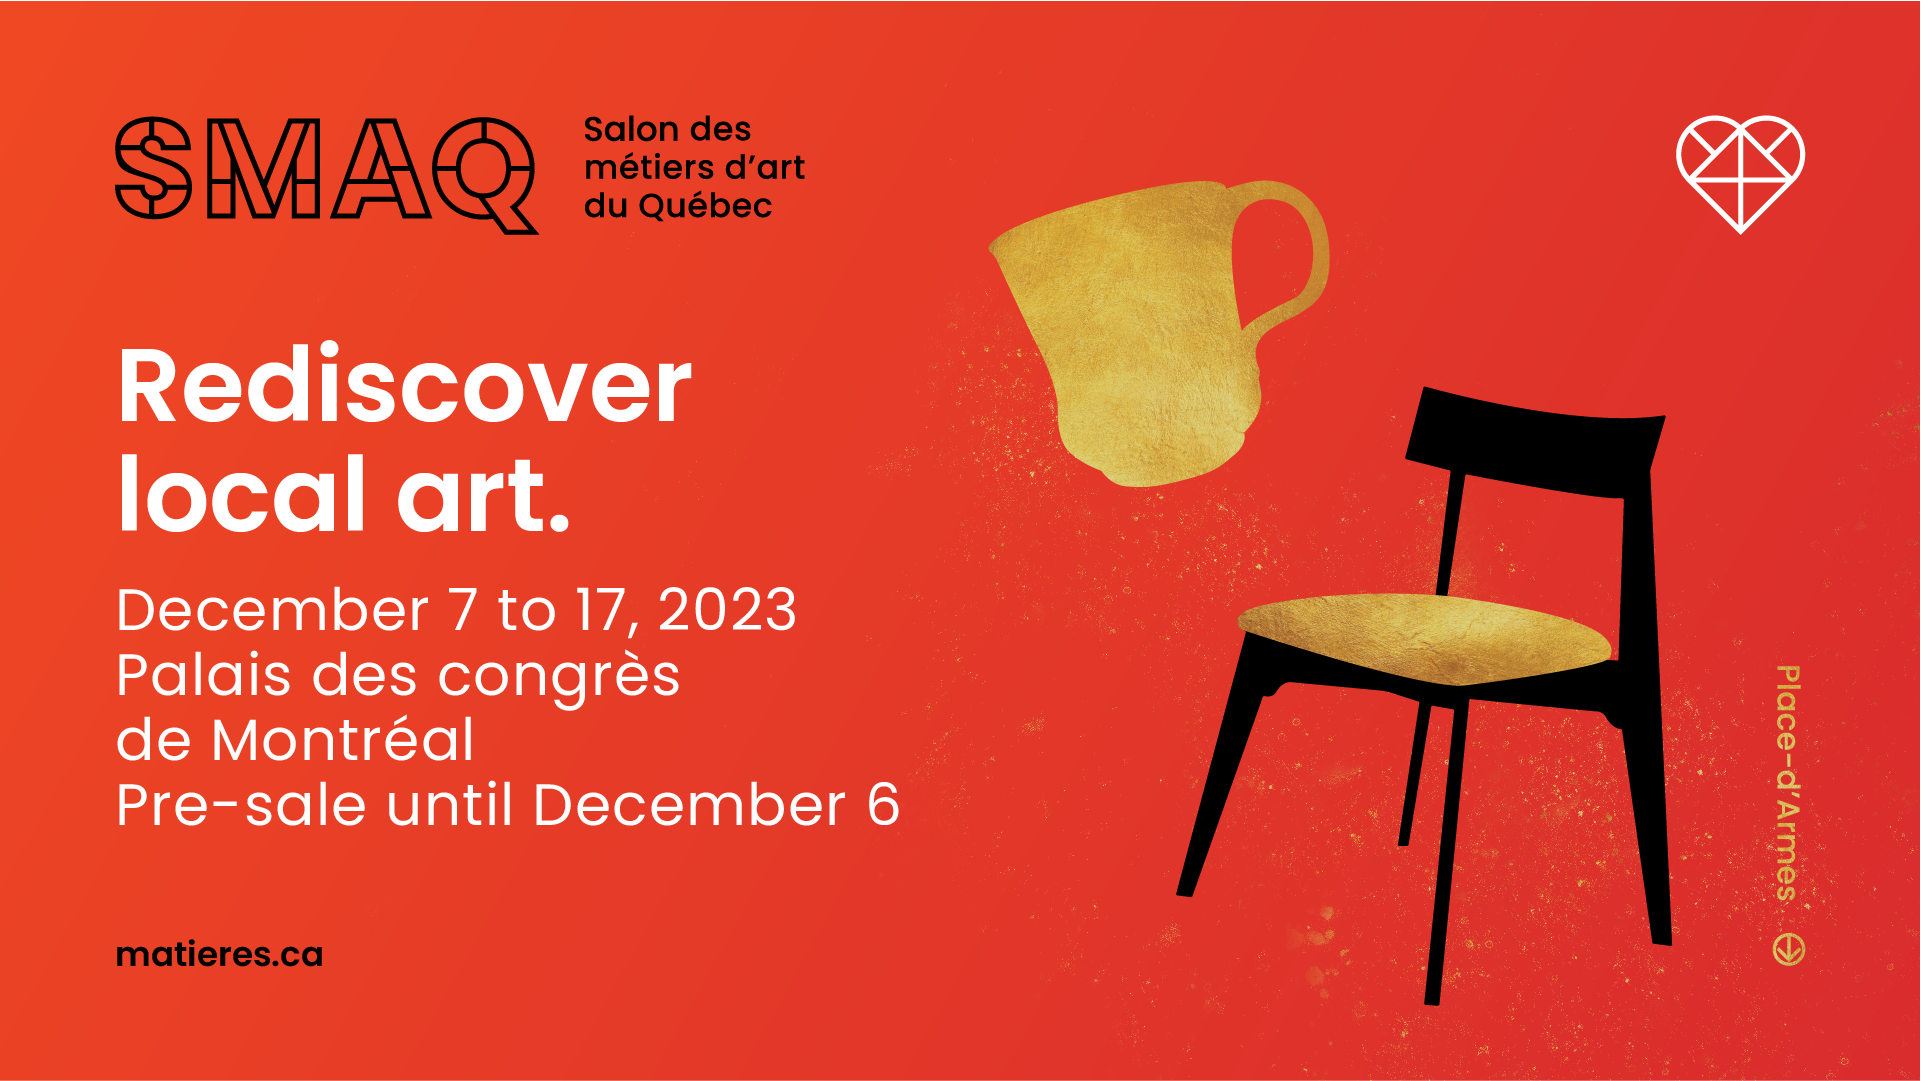 Leading visual for SMAQ 2023 : chair and cup gold on red dates and presale fee